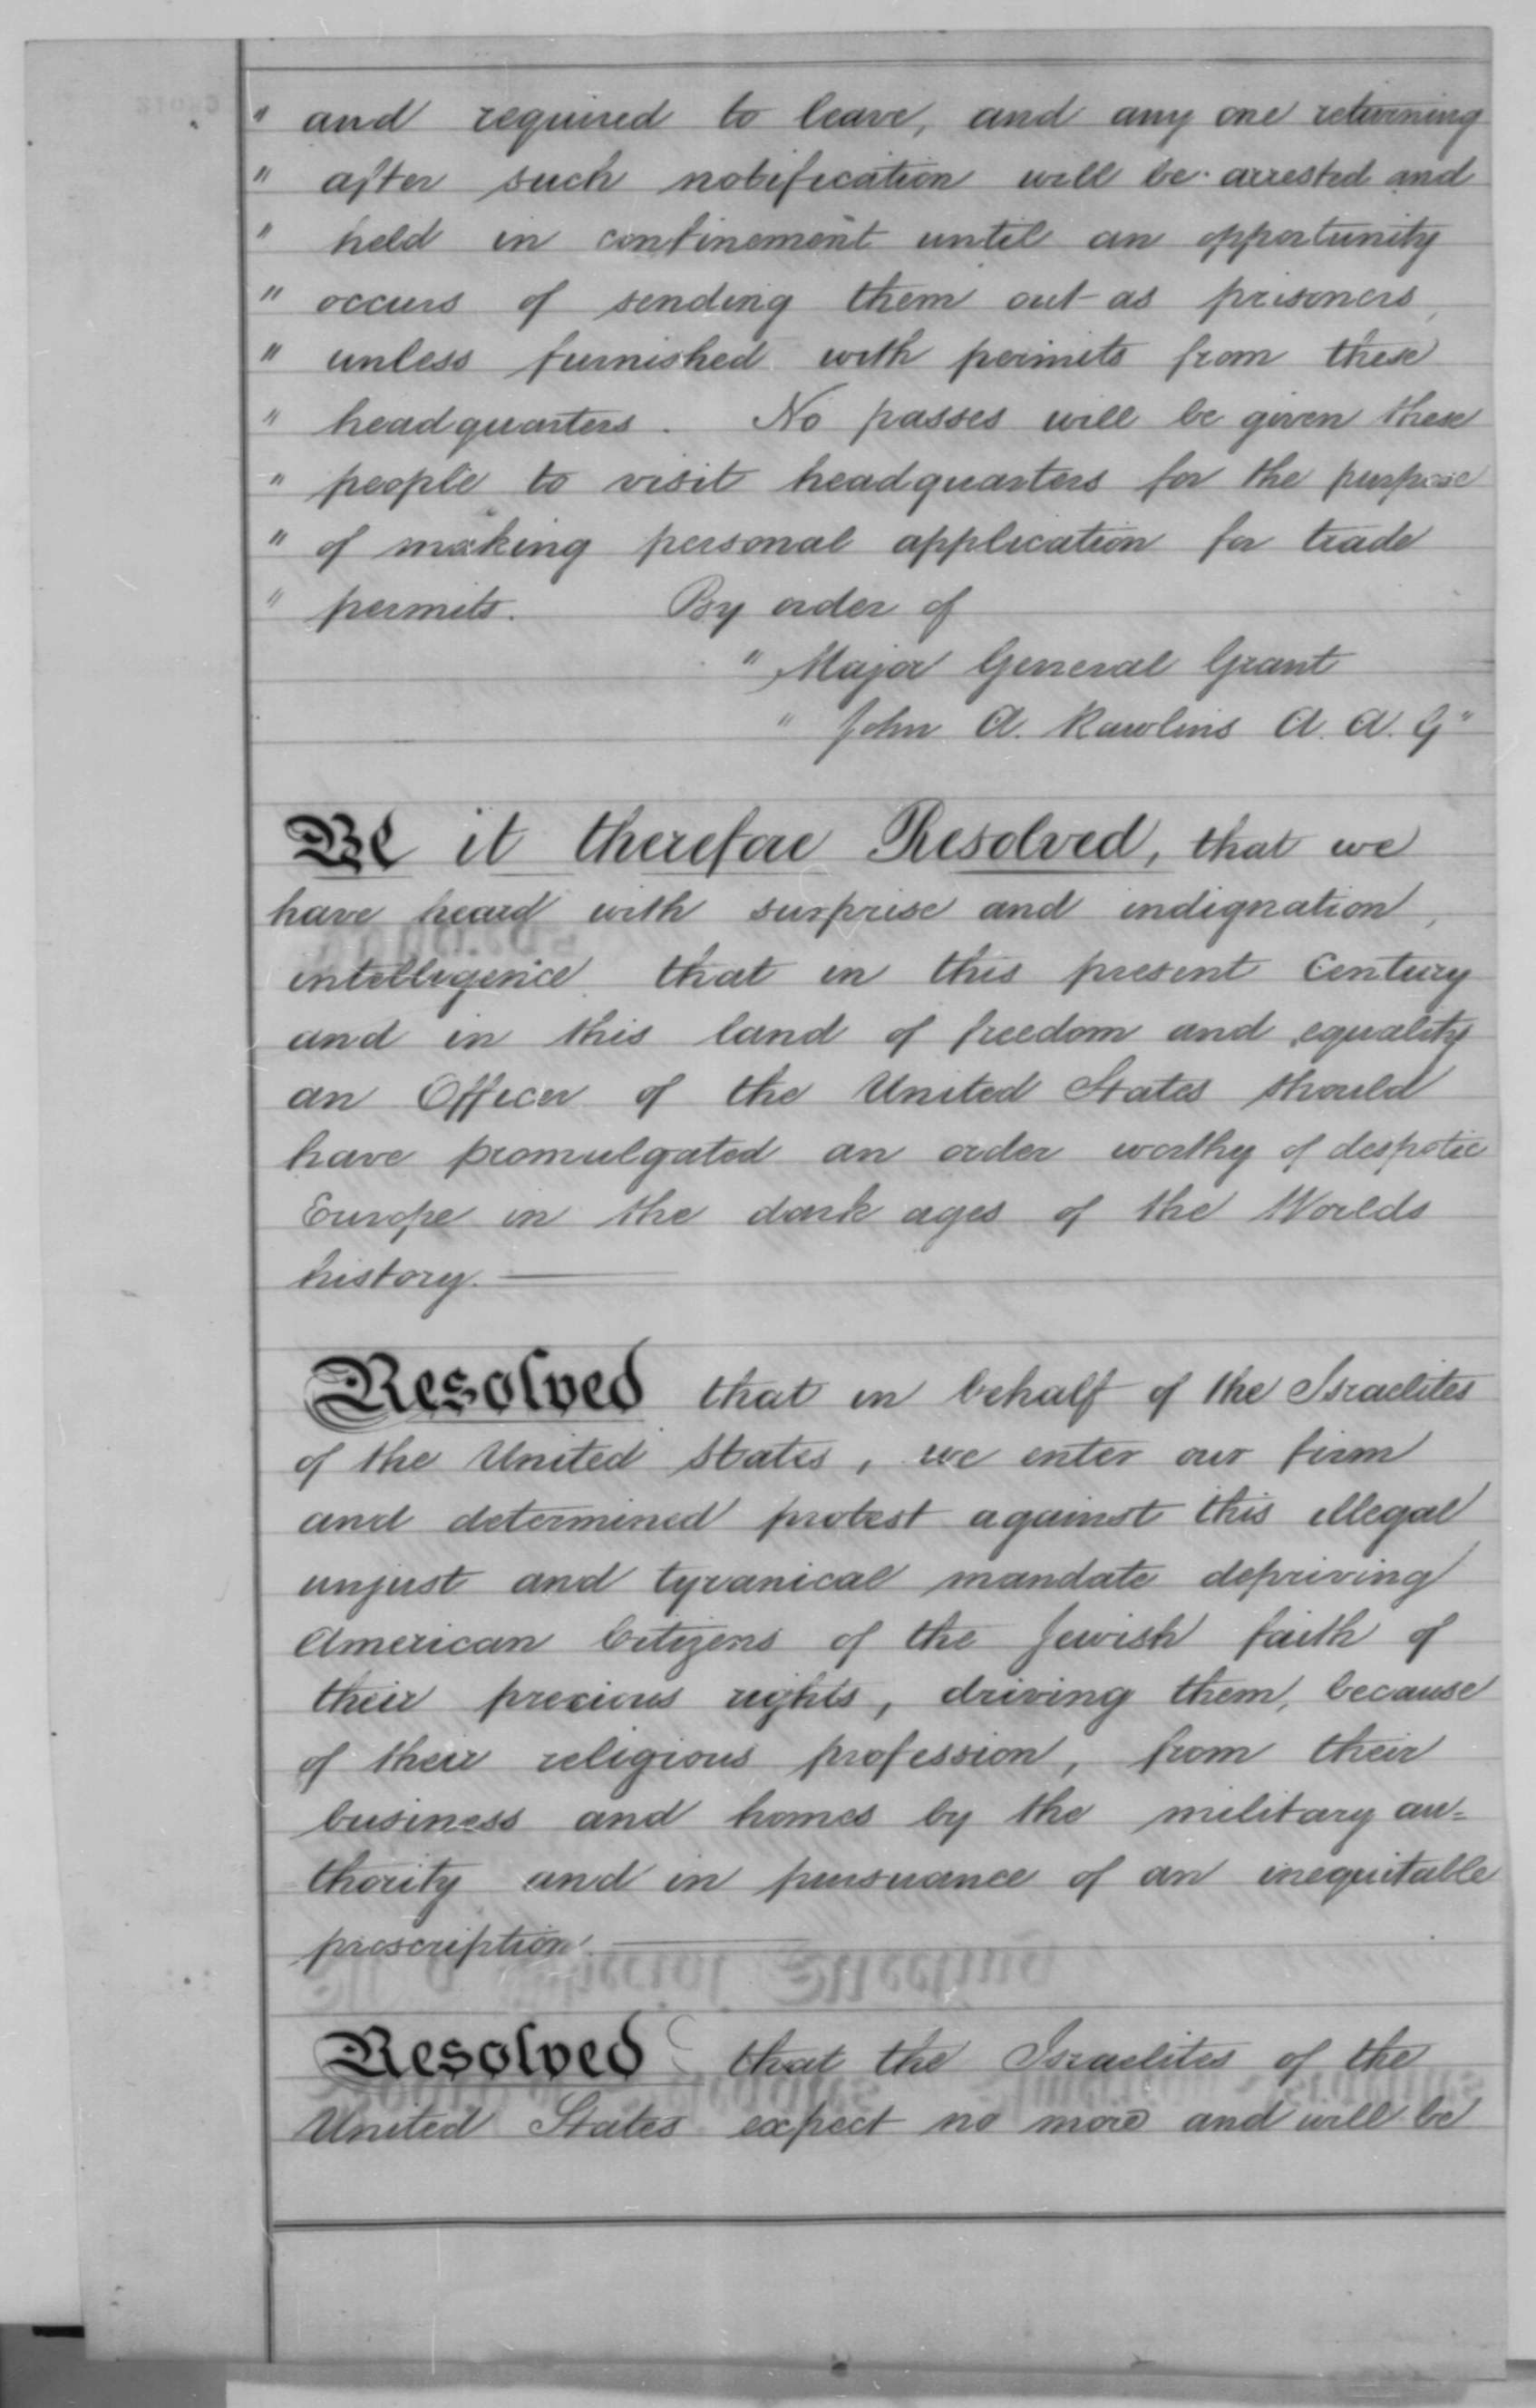 Abraham Lincoln Paper from Library of Congress